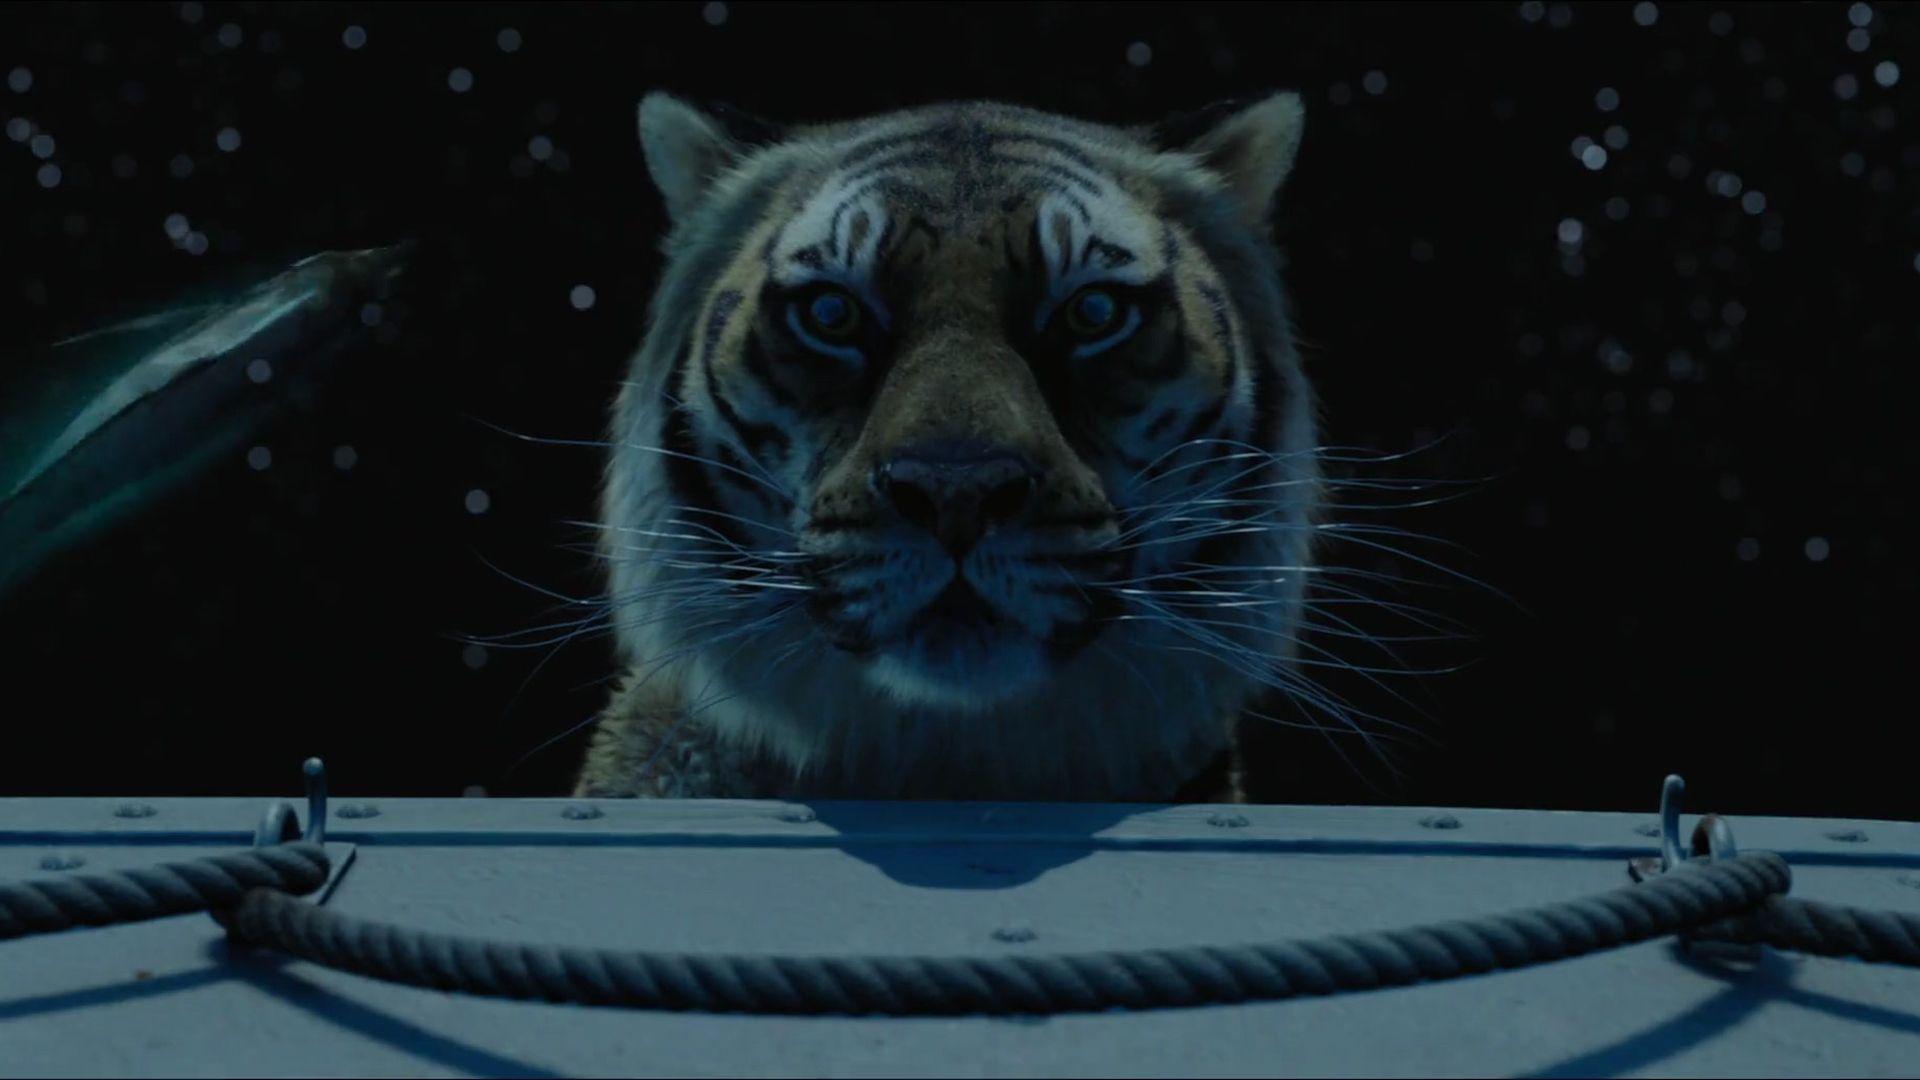 Life of Pi Wallpapers   Top Life of Pi Backgrounds 1920x1080